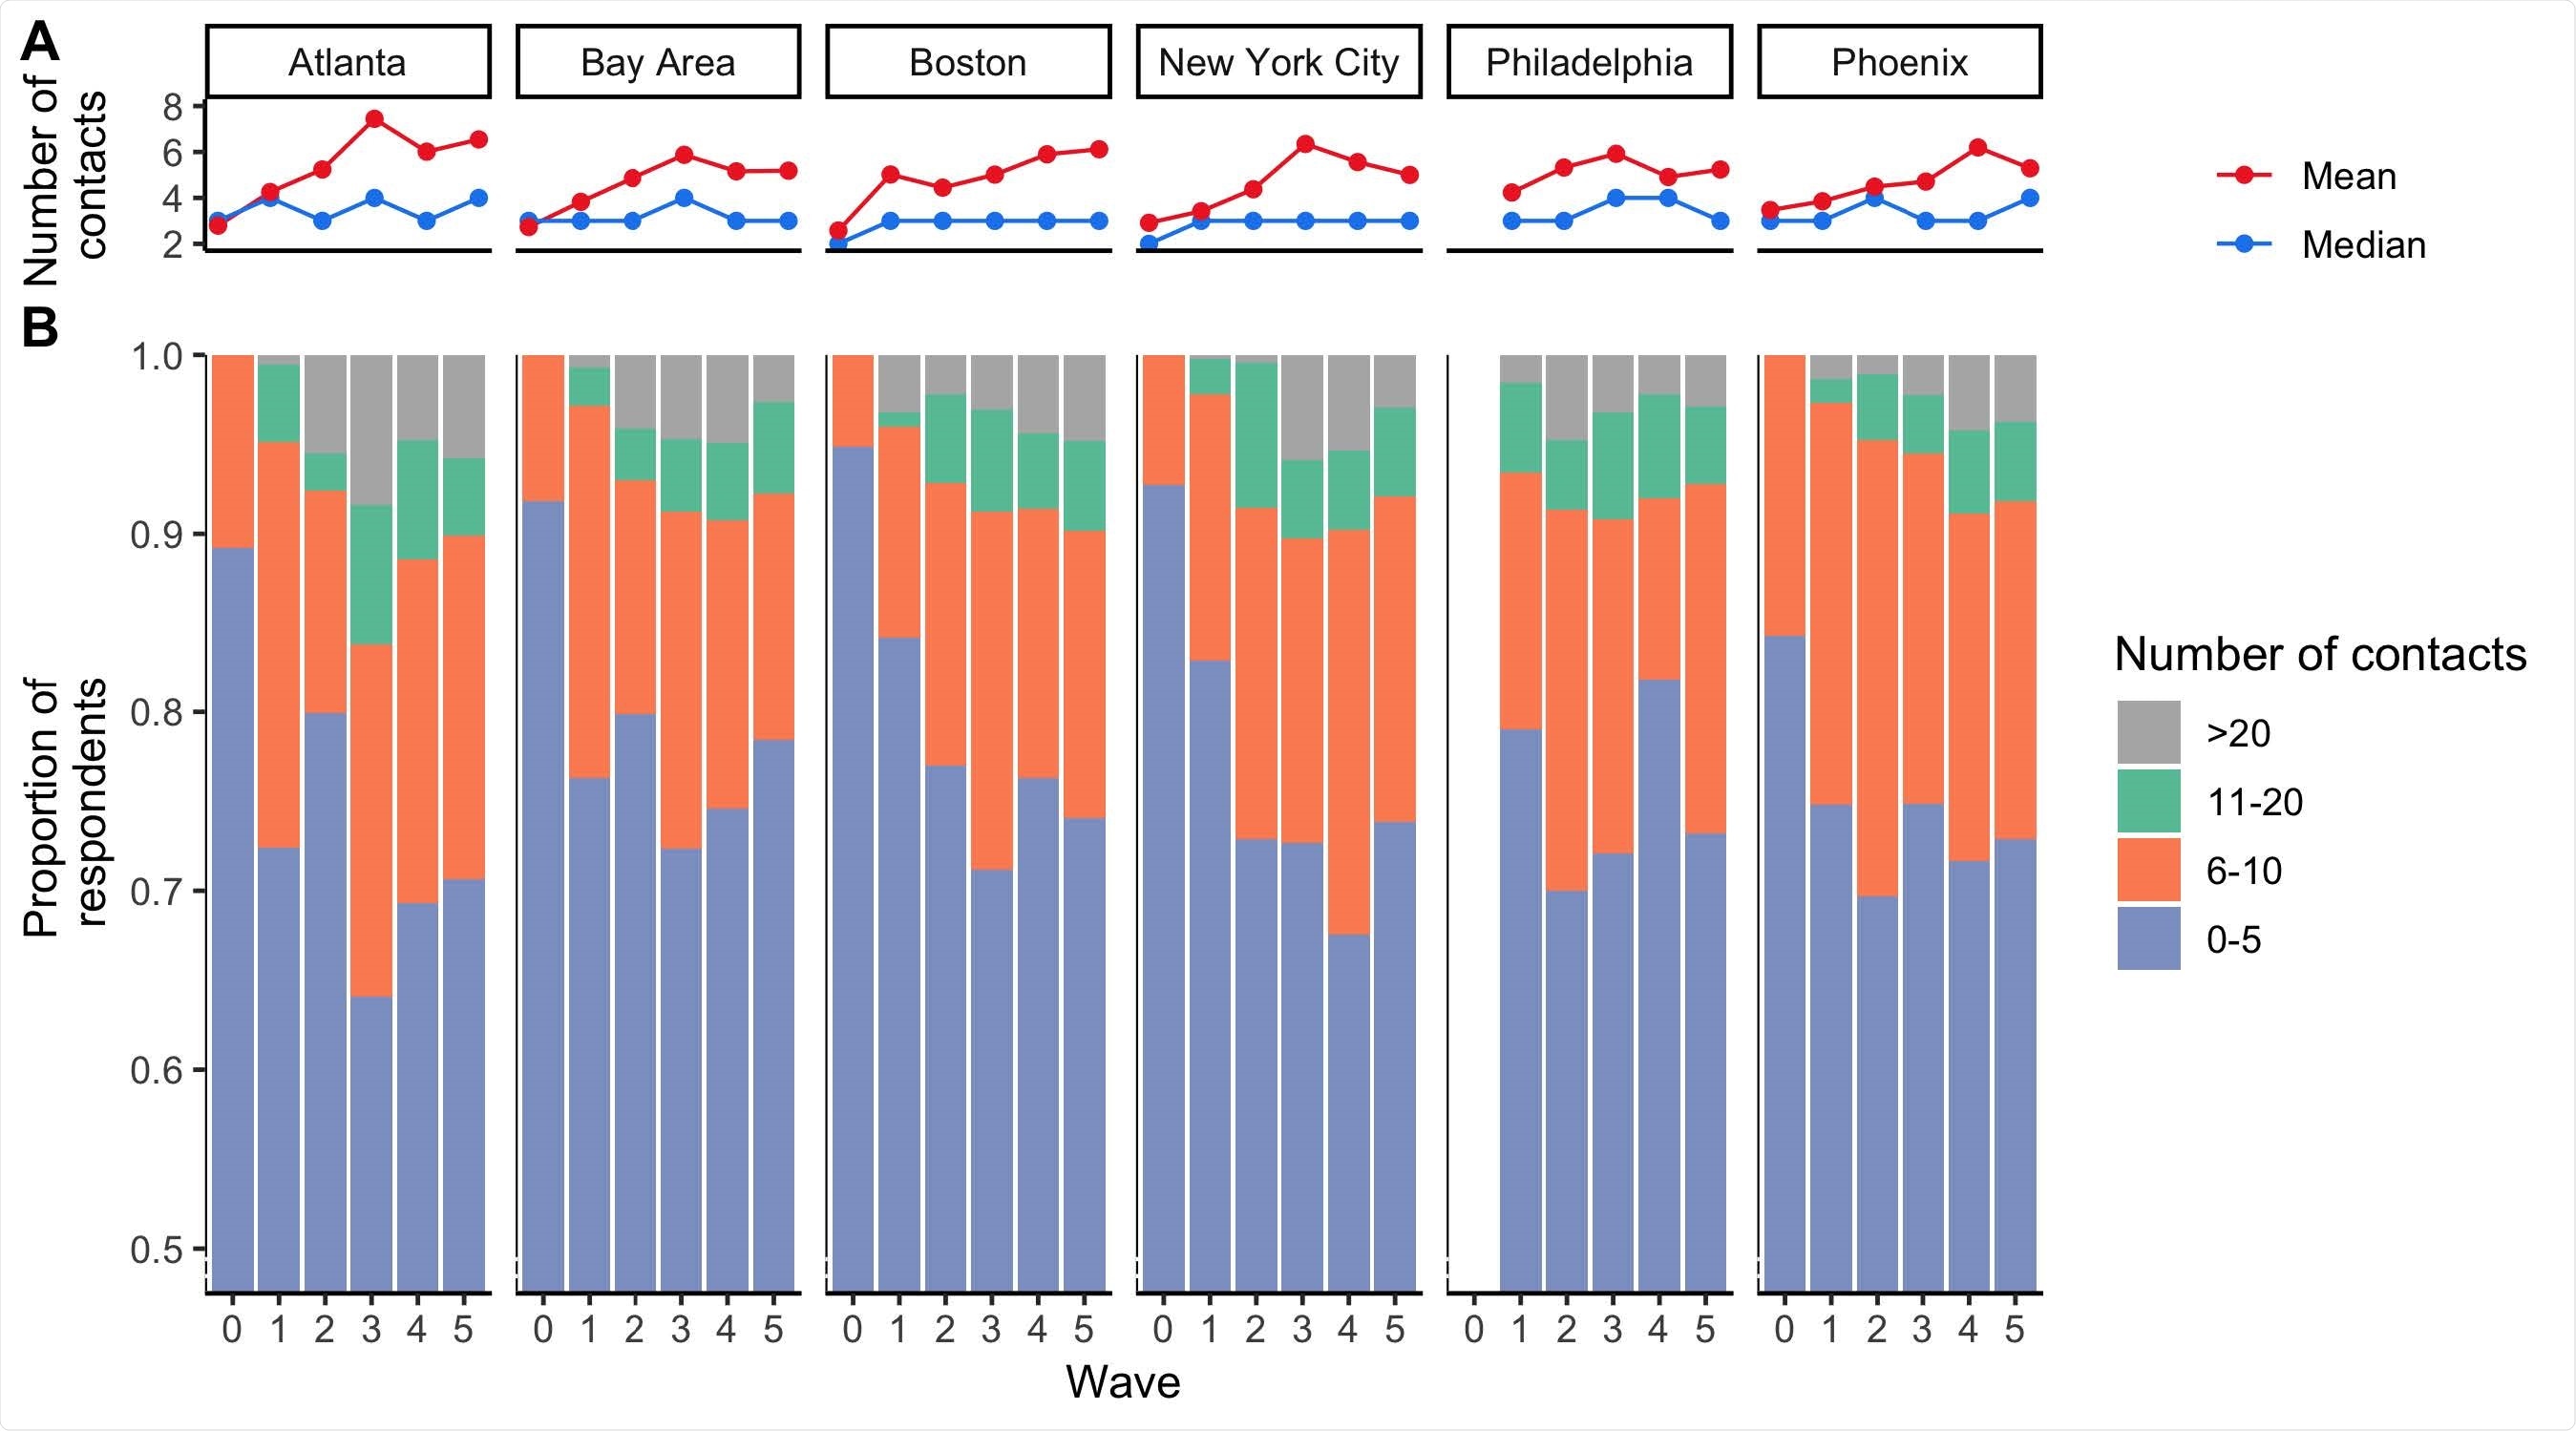 Descriptive analyses of the number of contacts estimated for the 6 DMAs across BICS Waves 0-5. A) Mean number of contacts (red line) and median number of contacts (blue line) reported during survey Waves 0-5 in each DMA in the BICS study. B) Proportion of BICS respondents reporting 0-5, 6-10, 11-20, and >20 contacts during survey Waves 0-5 in each DMA of the BICS study. The y-axis is truncated and begins at the value 0.5.